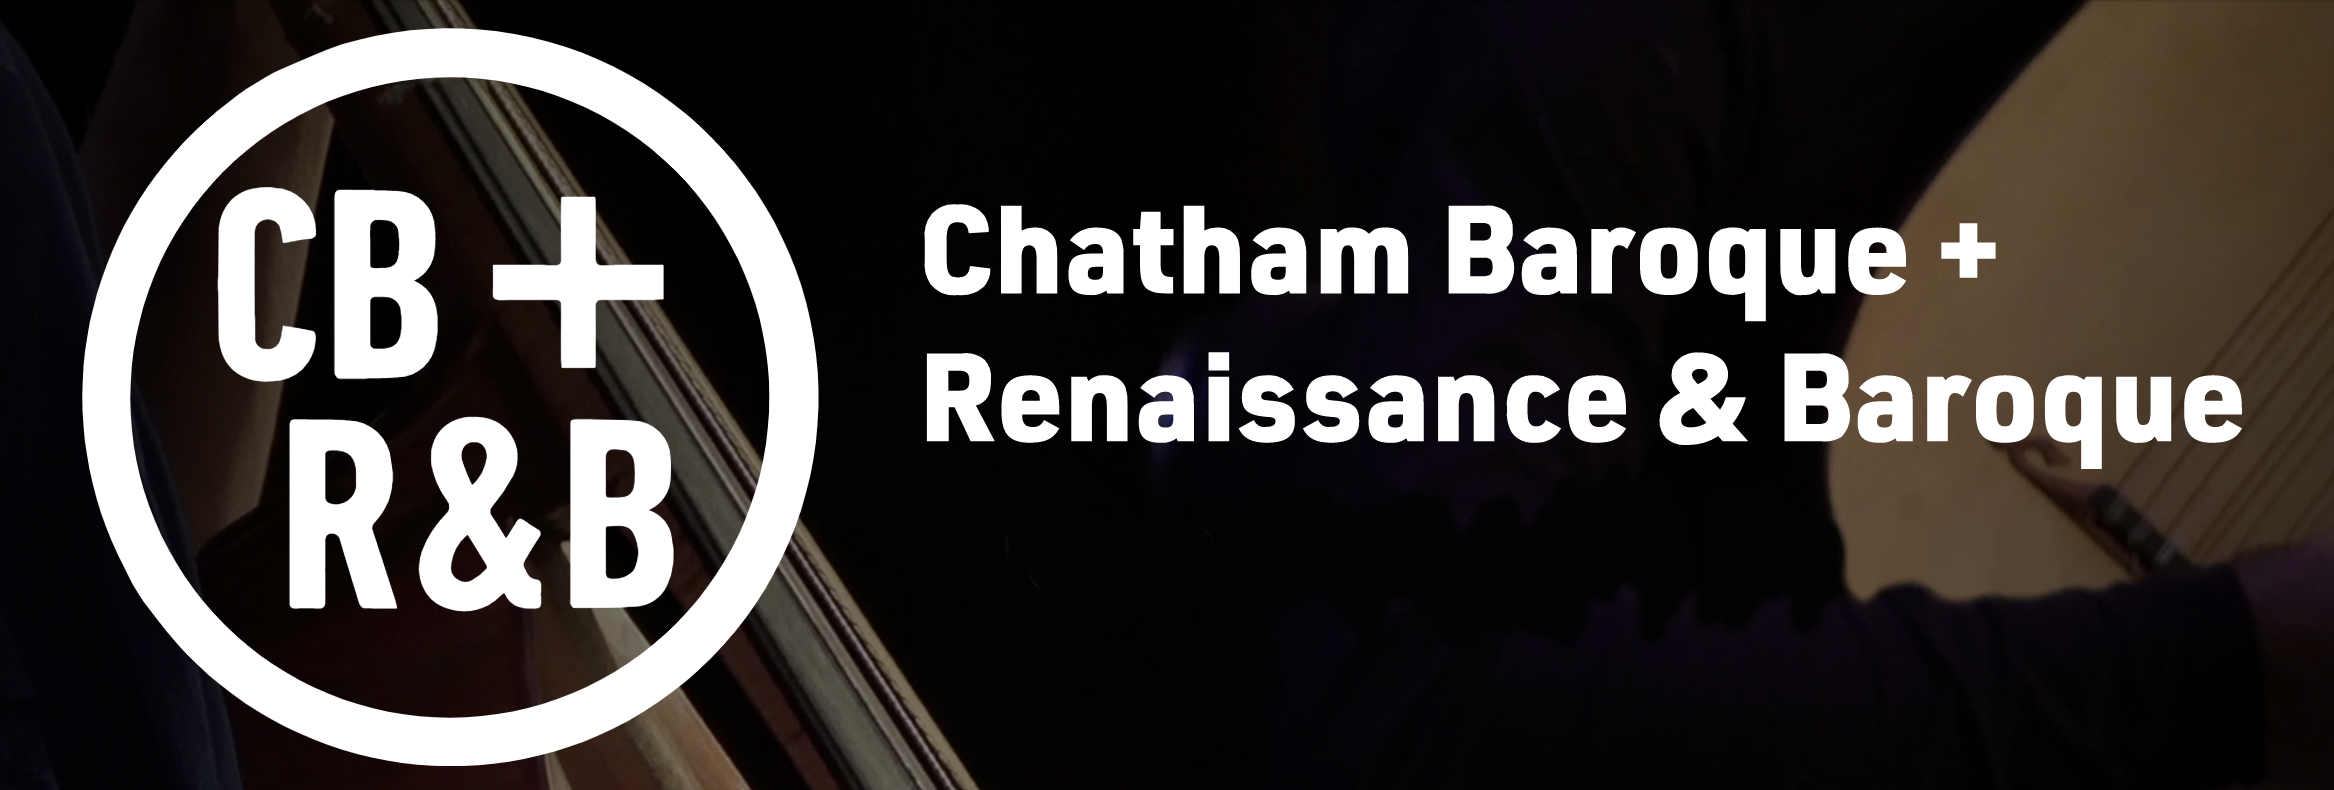 Dark background with white circle around letters: CB + R&B and white text: Chatham Baroque + Renaissance & Baroque